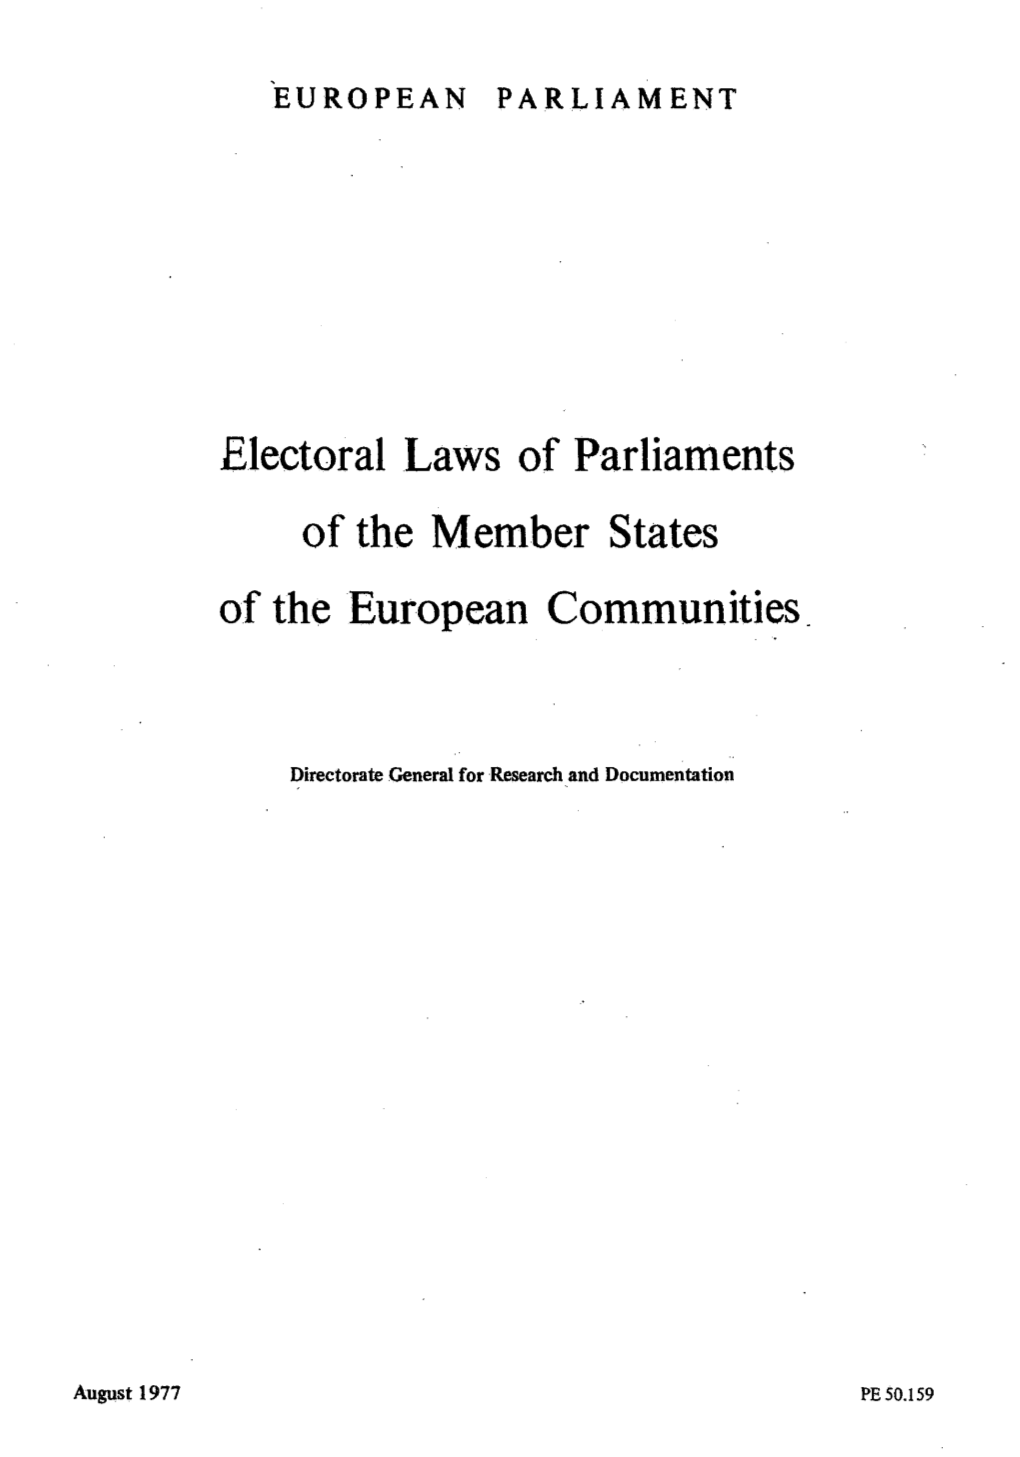 Electoral Laws of Parliaments of the Member States of the European Communities